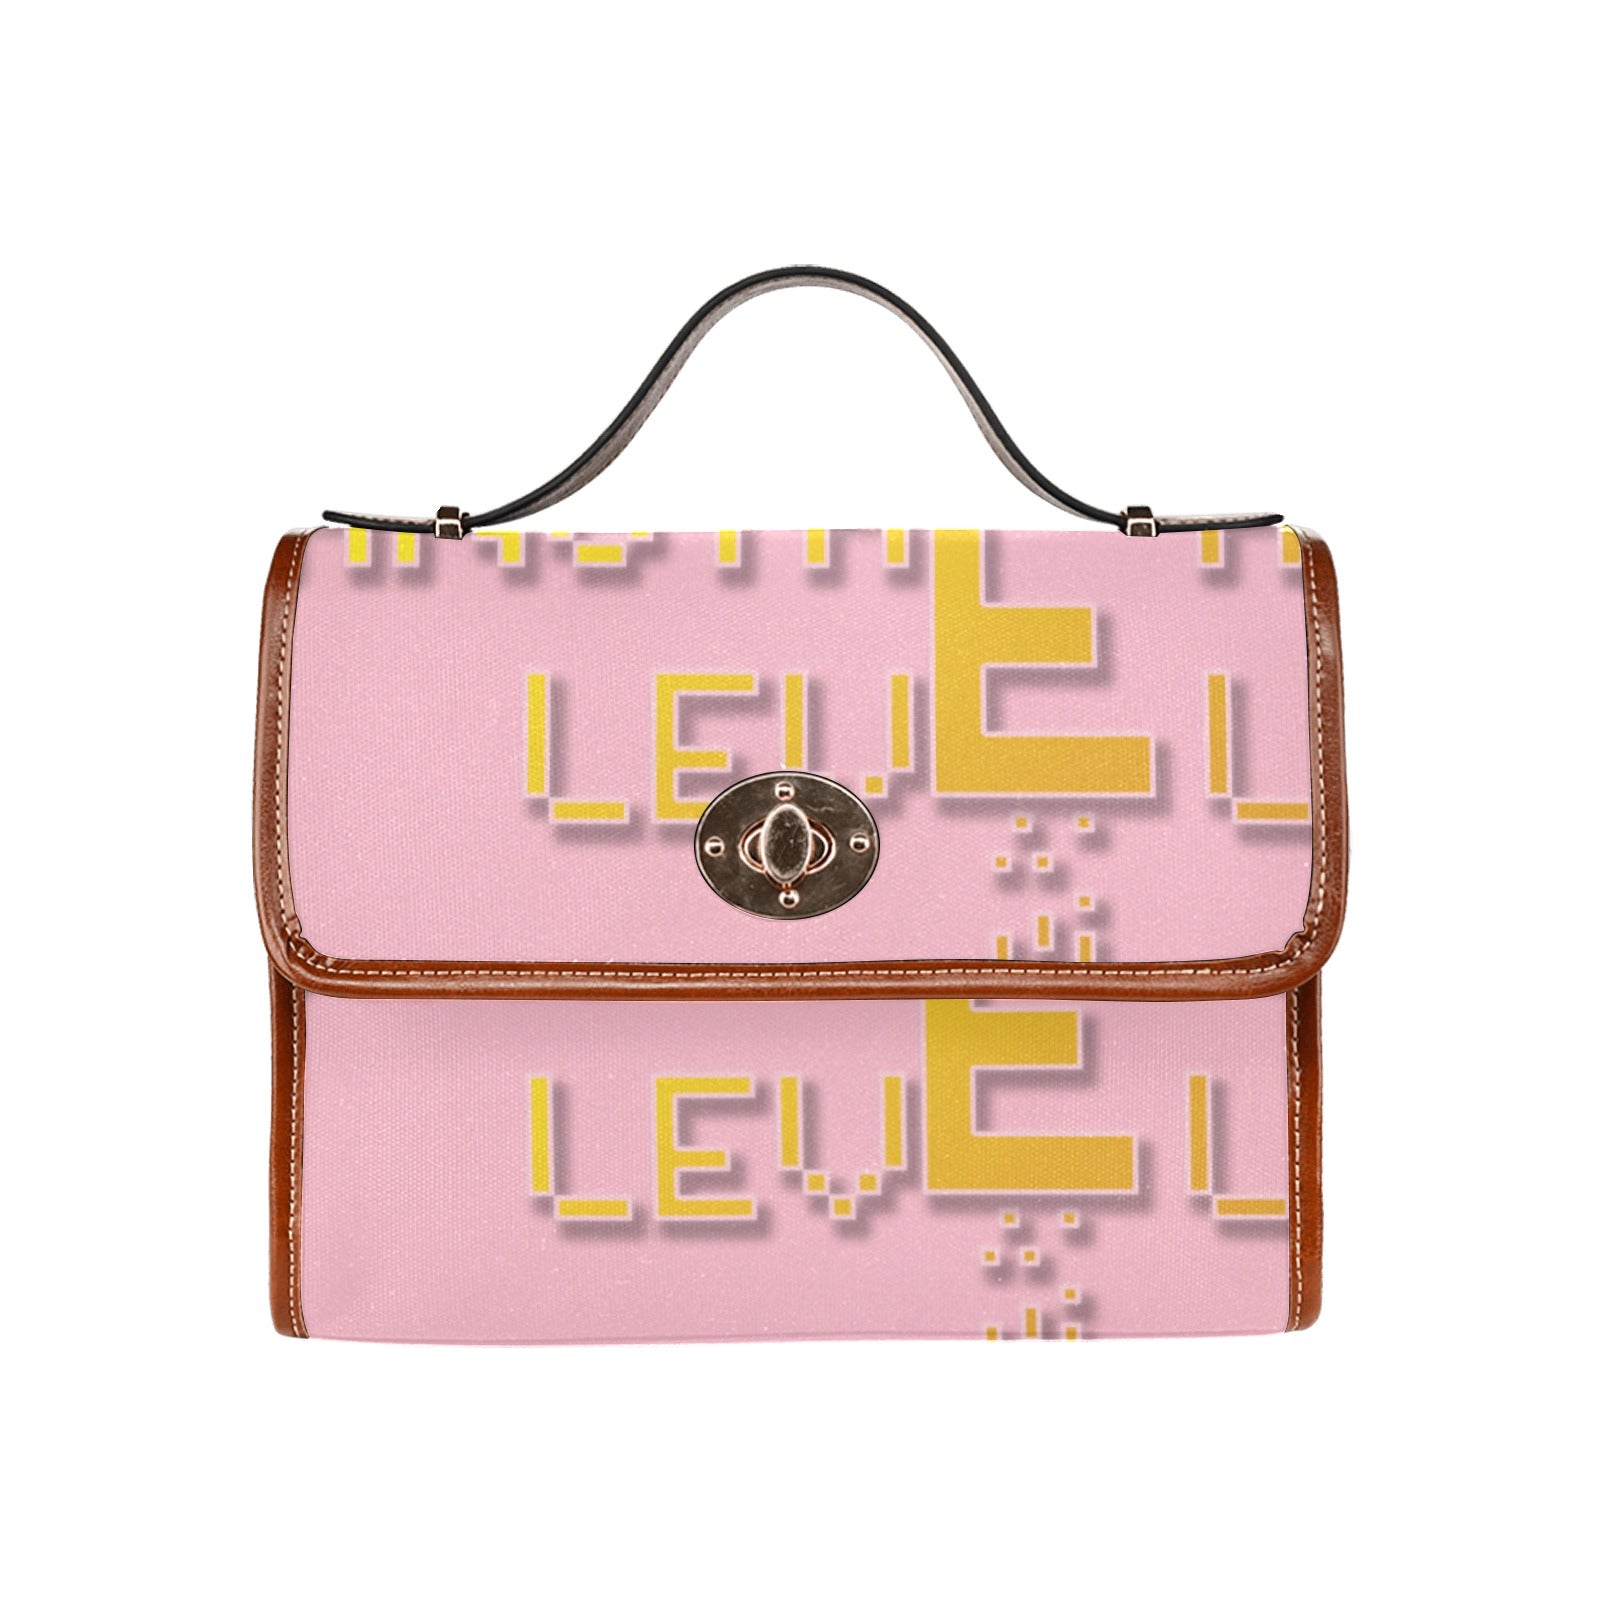 fz yellow levels handbag one size / fz - levels bag-pink all over print waterproof canvas bag(model1641)(brown strap)